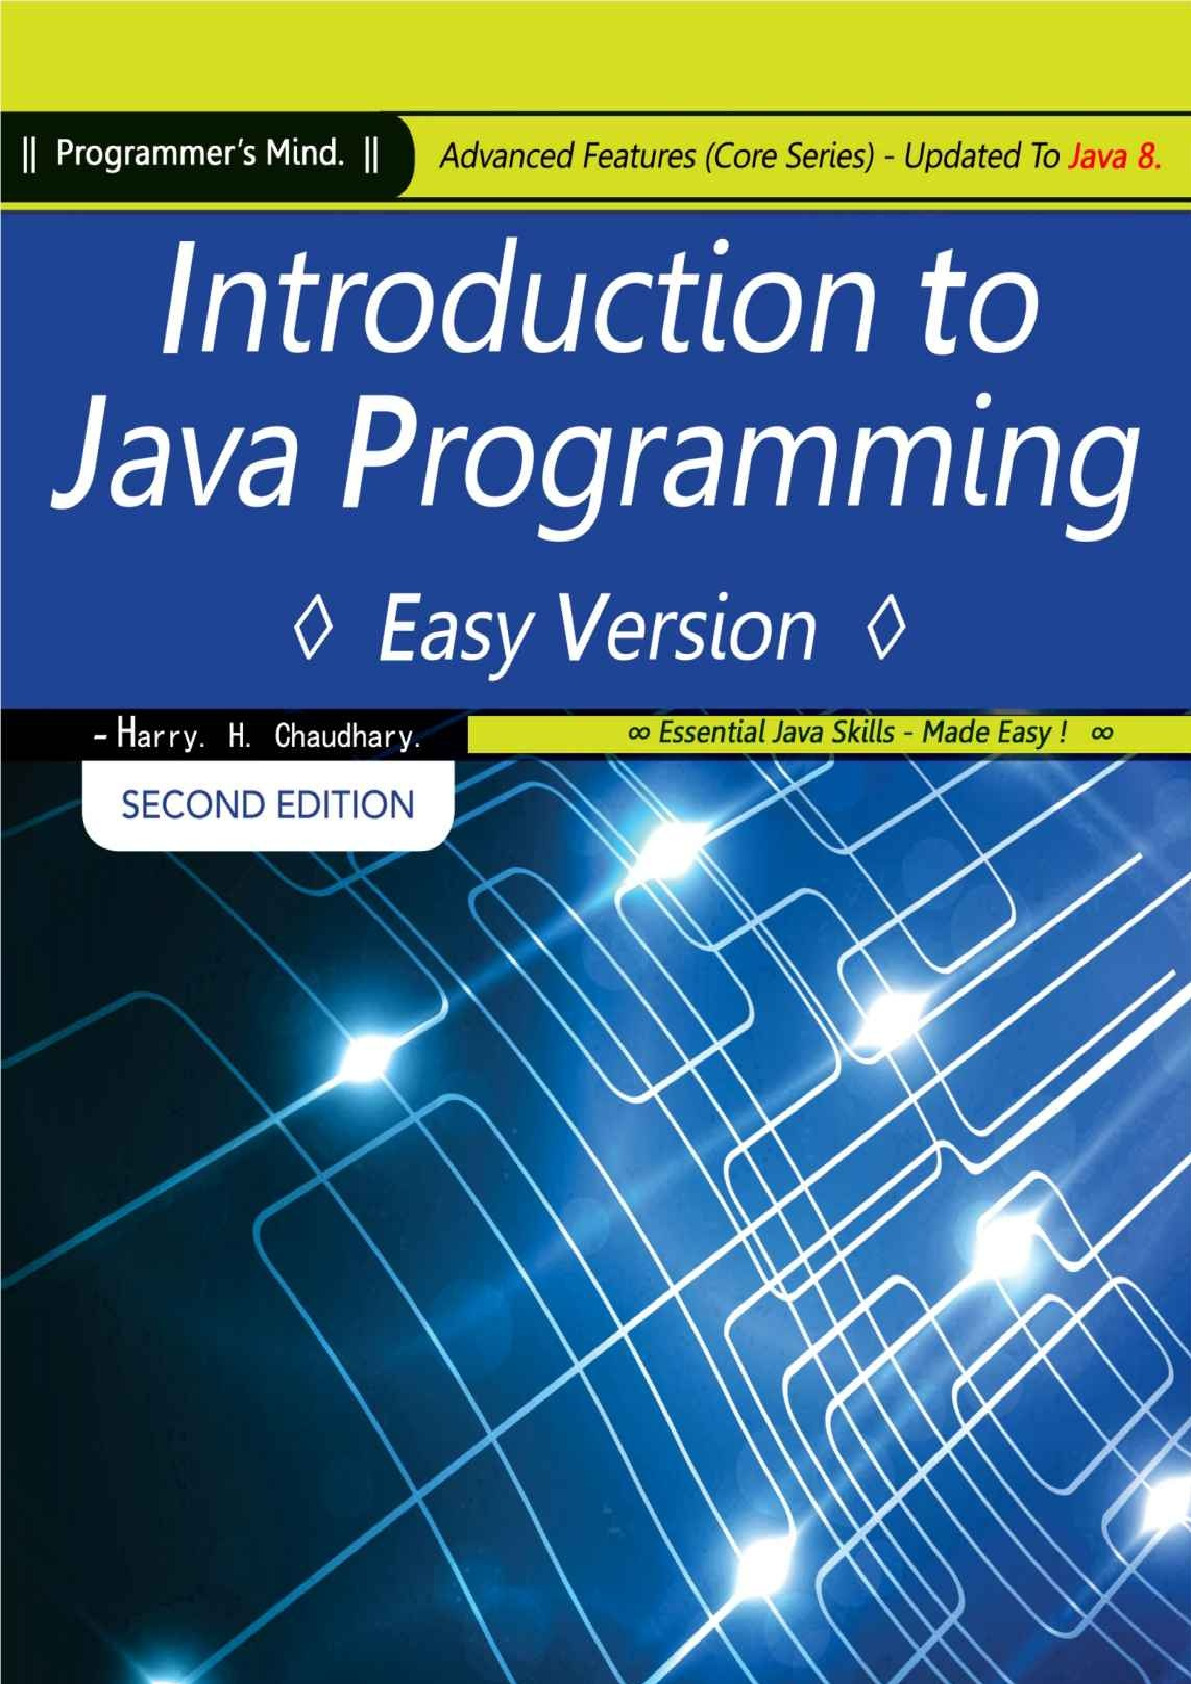 Chaudhary. Introduction to Java Programming_ Advanced Features (Core Series) Updated To Java 8 ( PDFDrive )